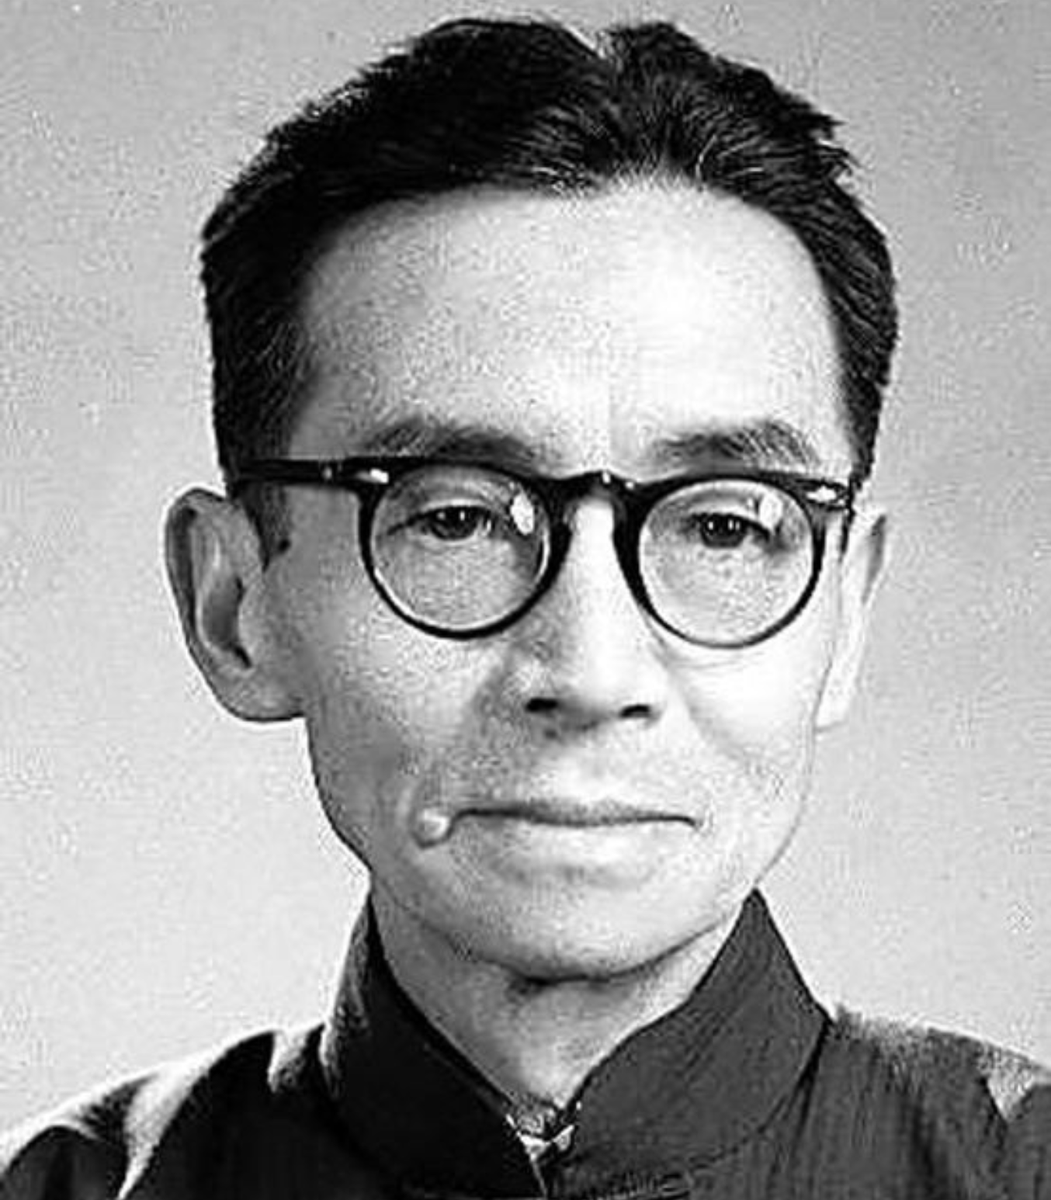 22/ BTW what happened to Liang Sicheng, the famed architect who advocated preservation? Well, under the Cultural Revolution, he was denounced as a "counter-revolutionary", fired from his post at Tsinghua, and sent down to the countryside, where he died in 1972.